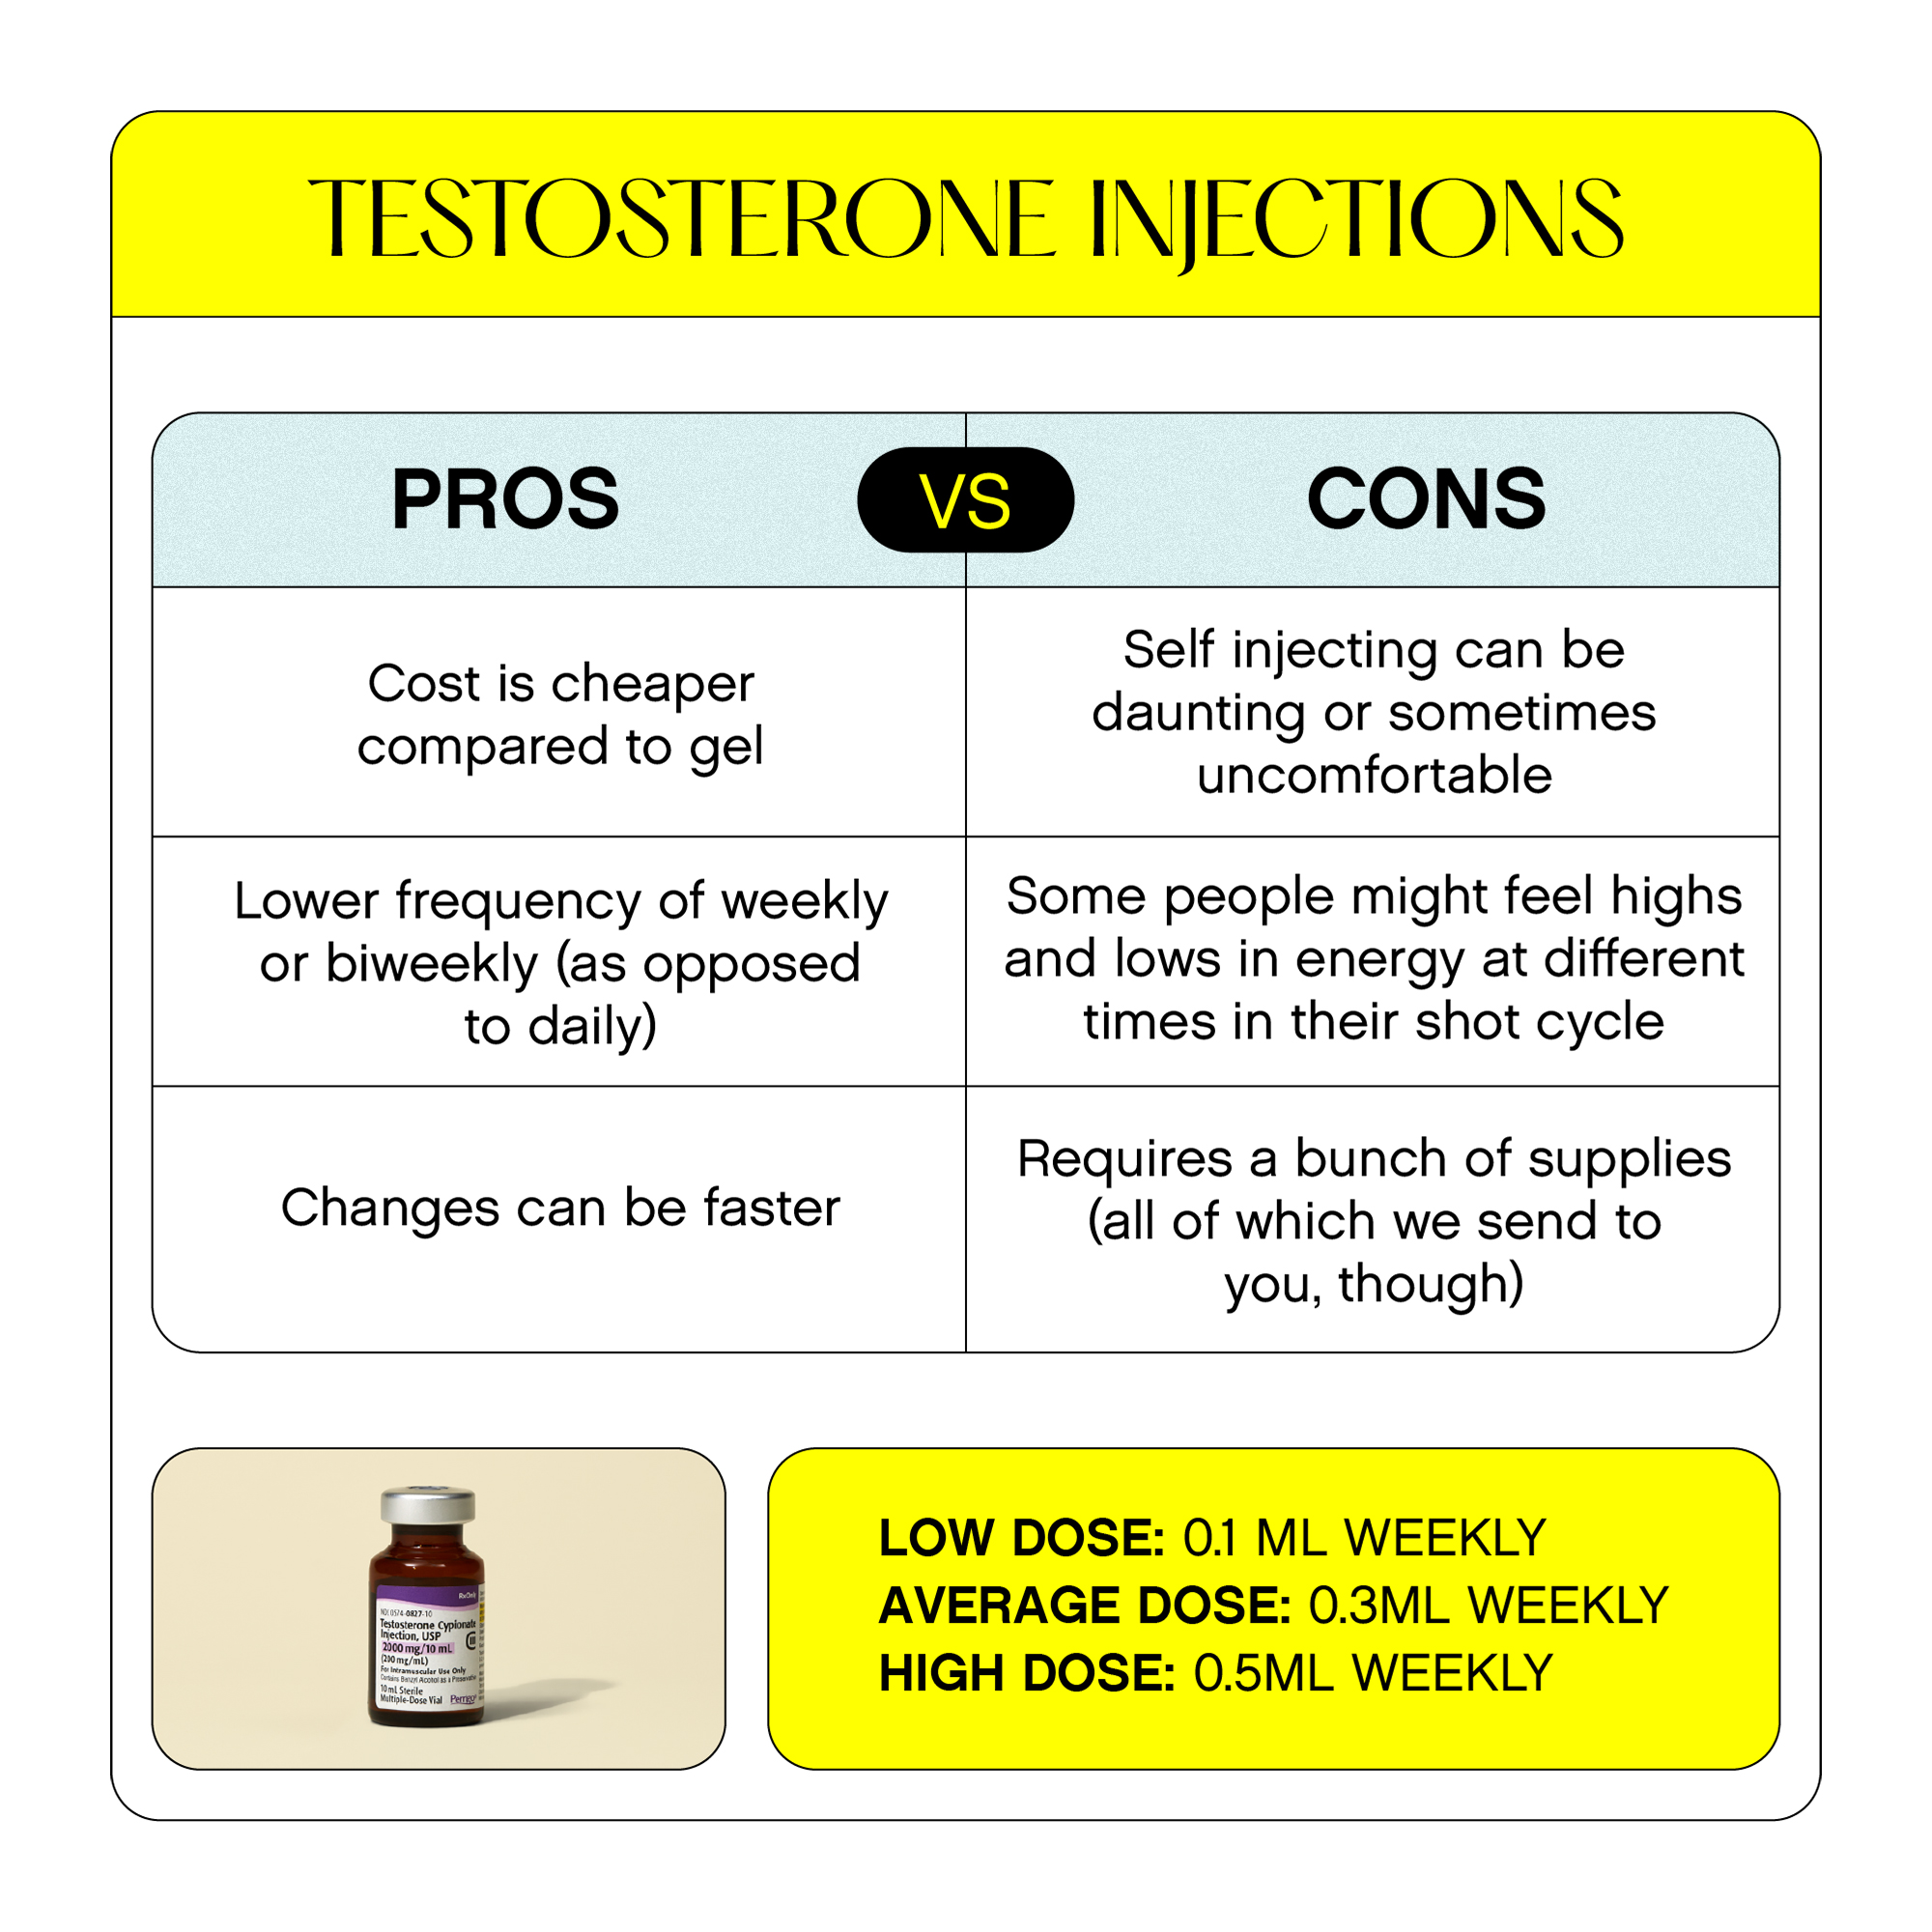 Testosterone injection pros and cons